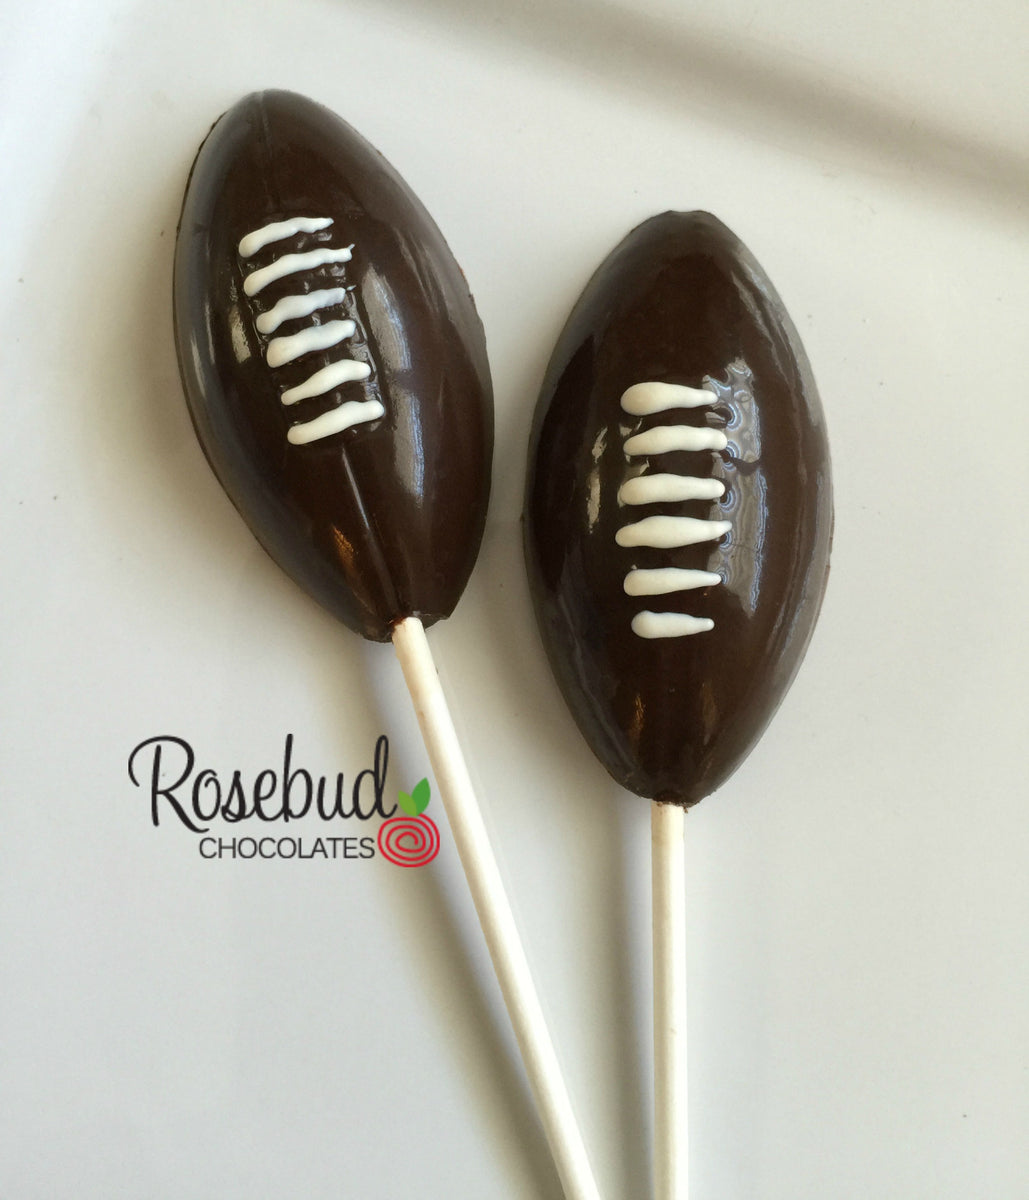 12 FOOTBALL Chocolate Lollipop Candy Sports Birthday Party Favors ...